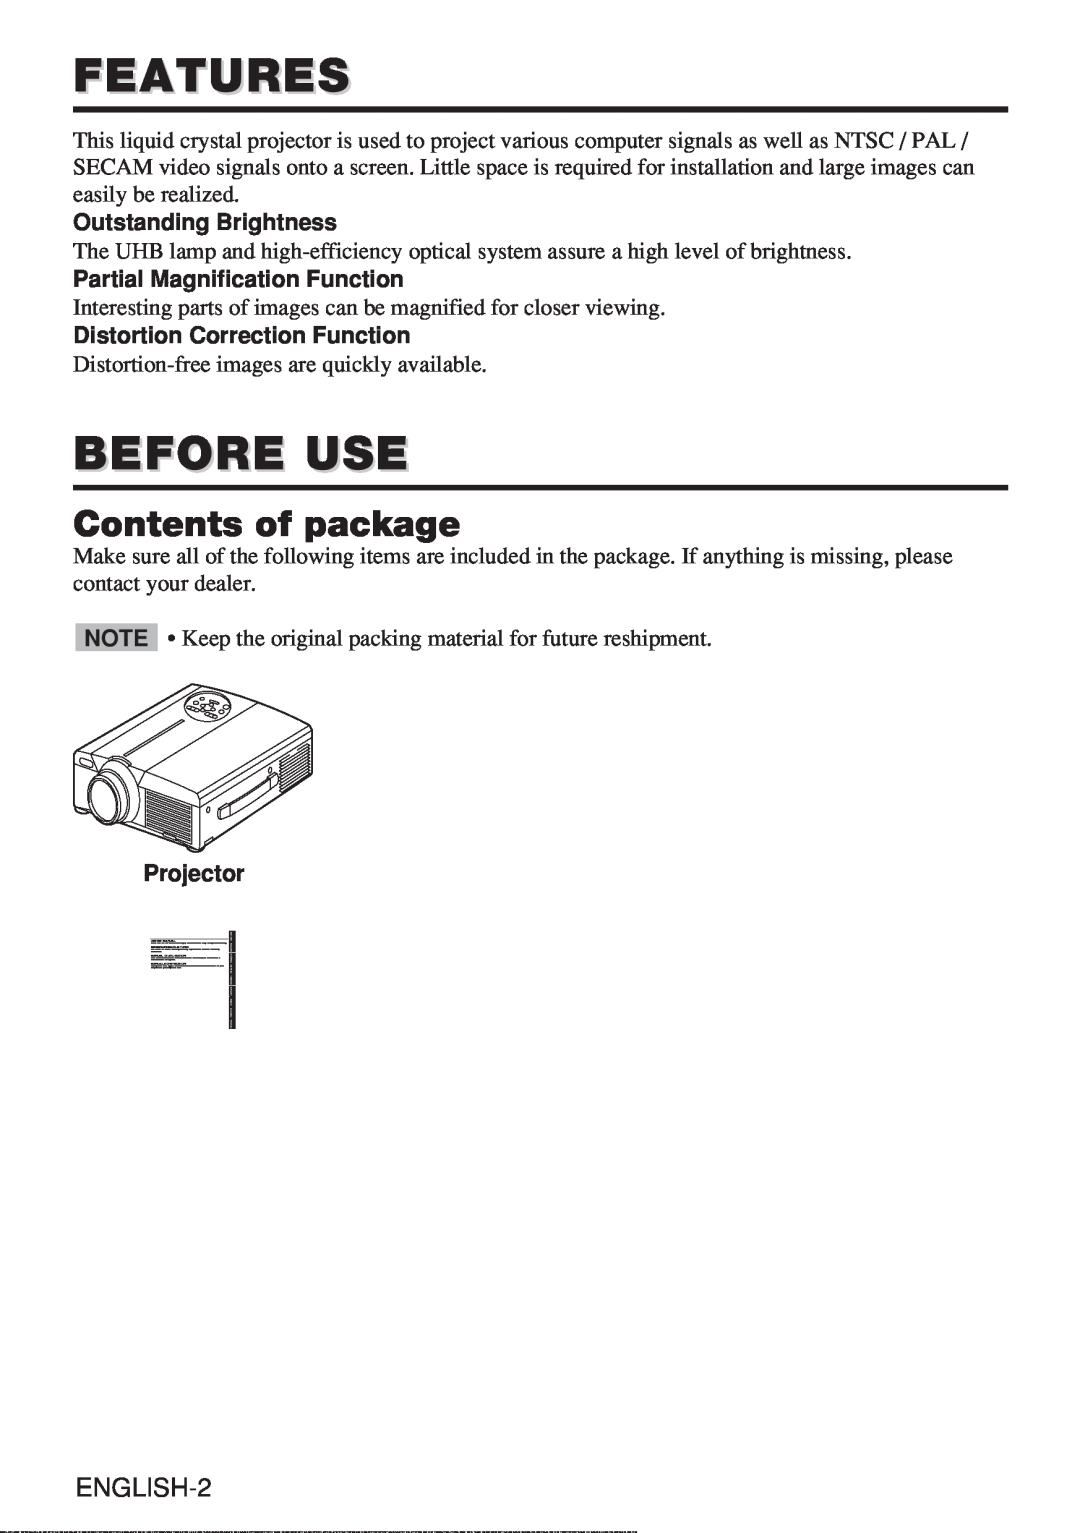 Hitachi CP-X985W user manual Features, Before Use, Contents of package 